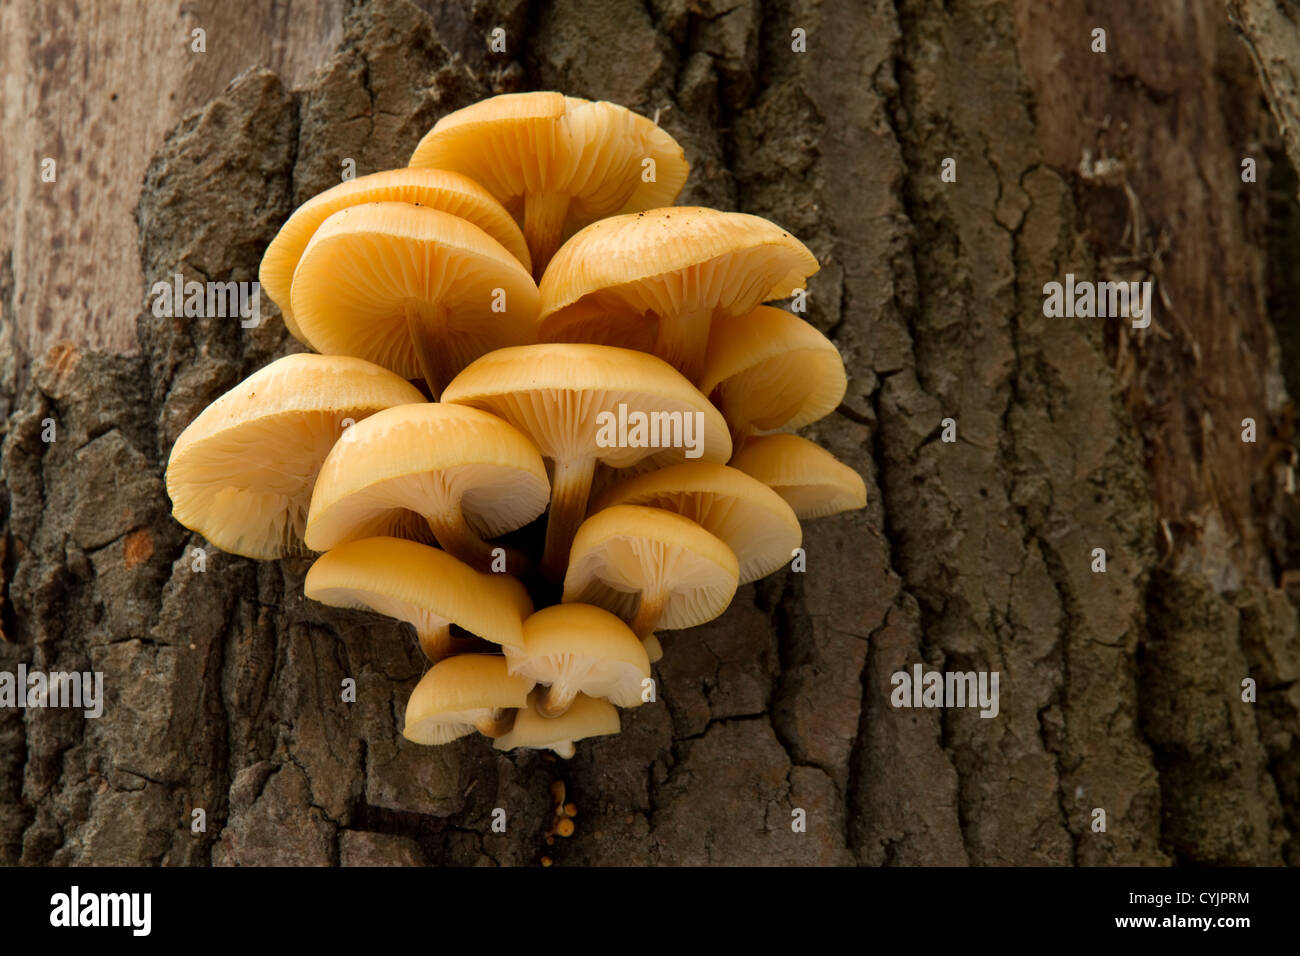 yellow mushrooms on a tree trunk in the autumn forest Stock Photo